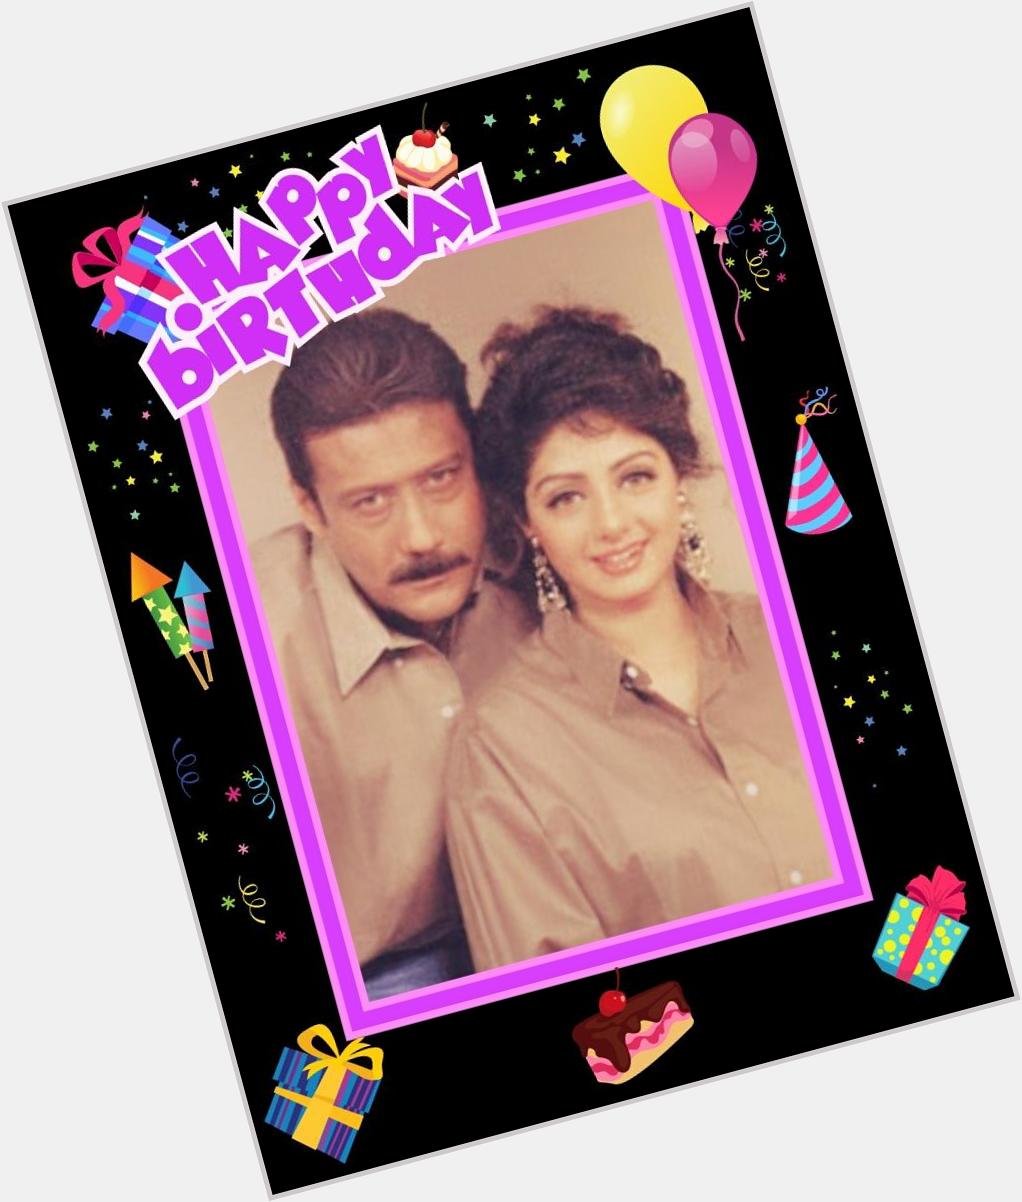 A Very Happy Birthday to Jackie Shroff!
Good wishes from & all ans! 